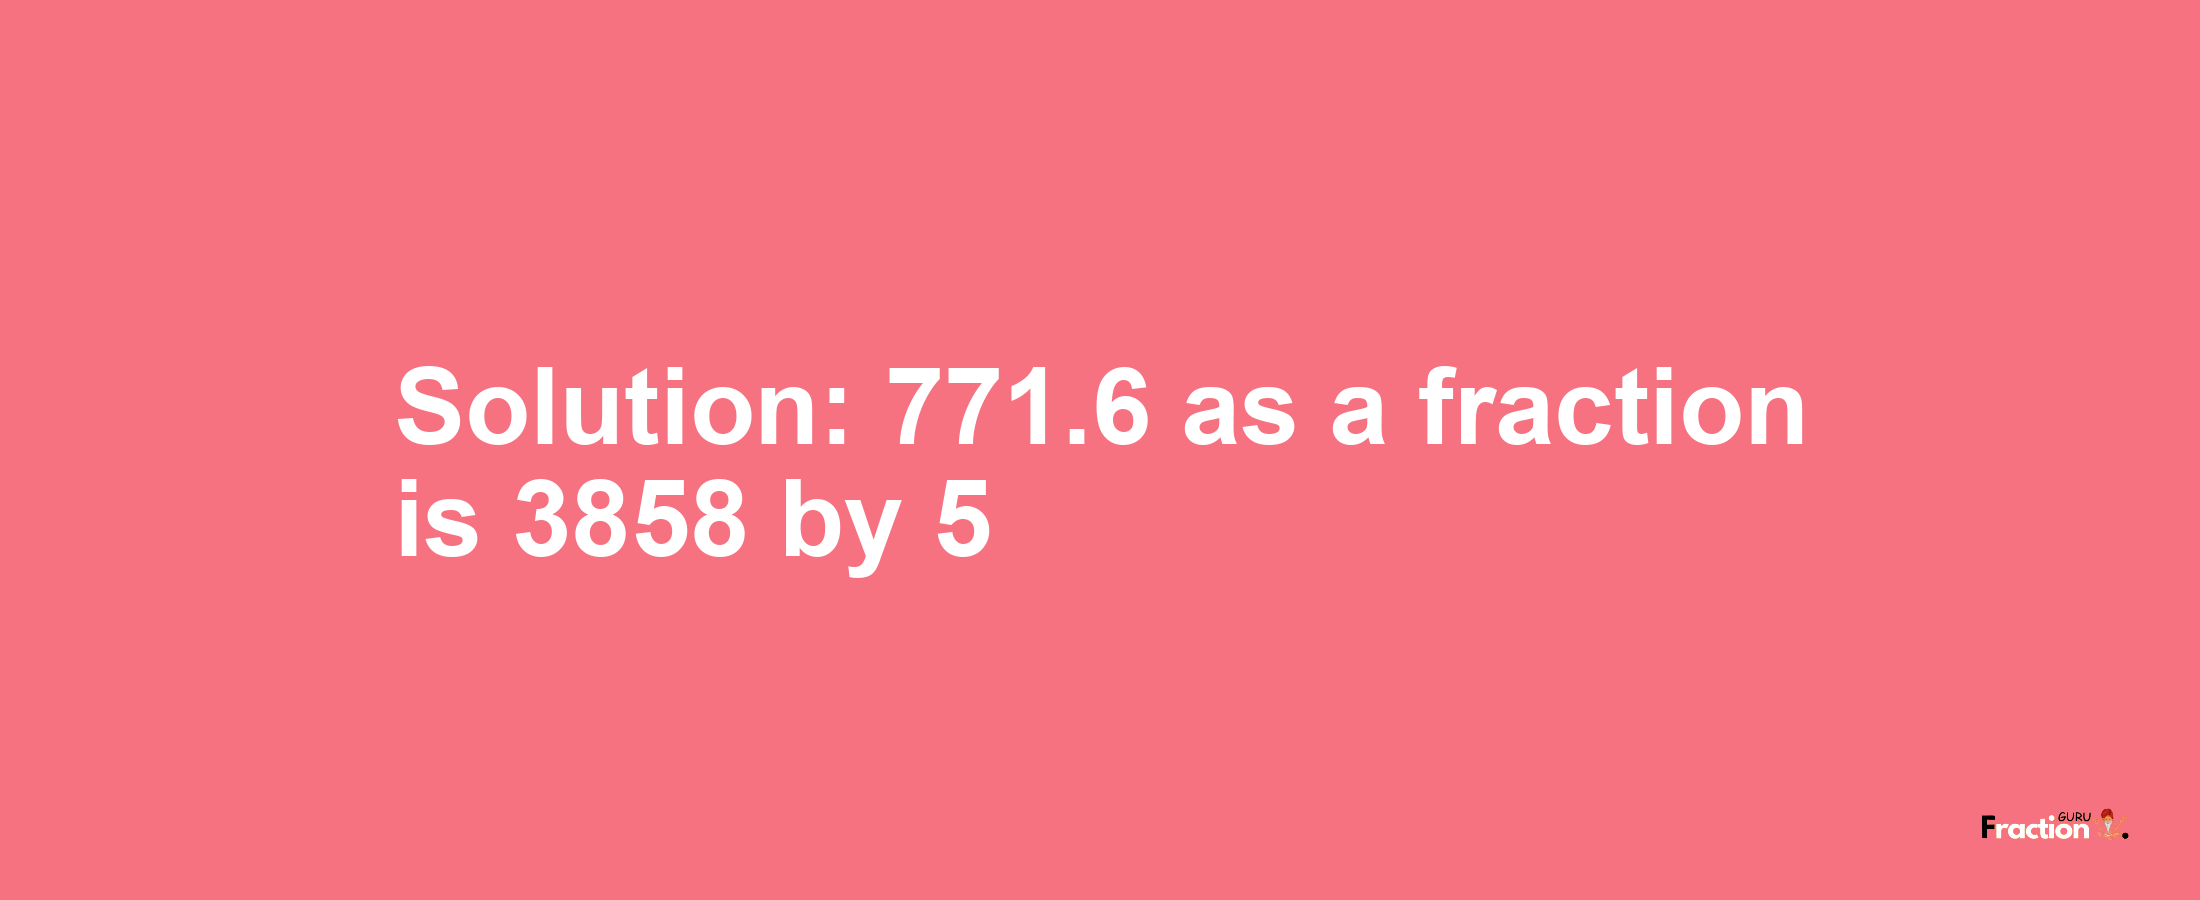 Solution:771.6 as a fraction is 3858/5